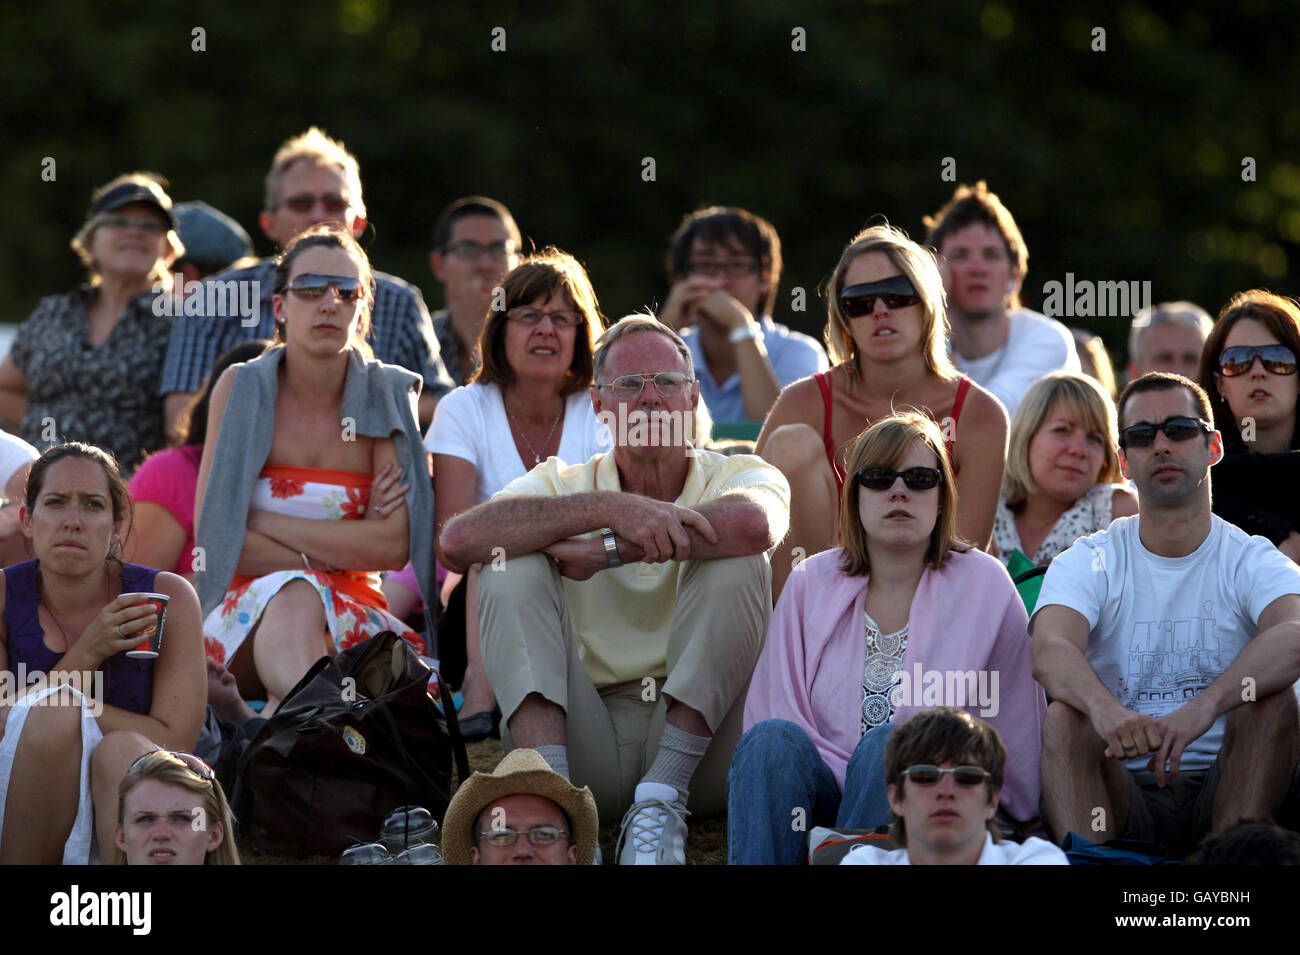 Spectators on Murray Mount observe Great Britain's Andy Murrays match against France's Richard Gasquet during the Wimbledon Championships 2008 at the All England Tennis Club in Wimbledon. Stock Photo